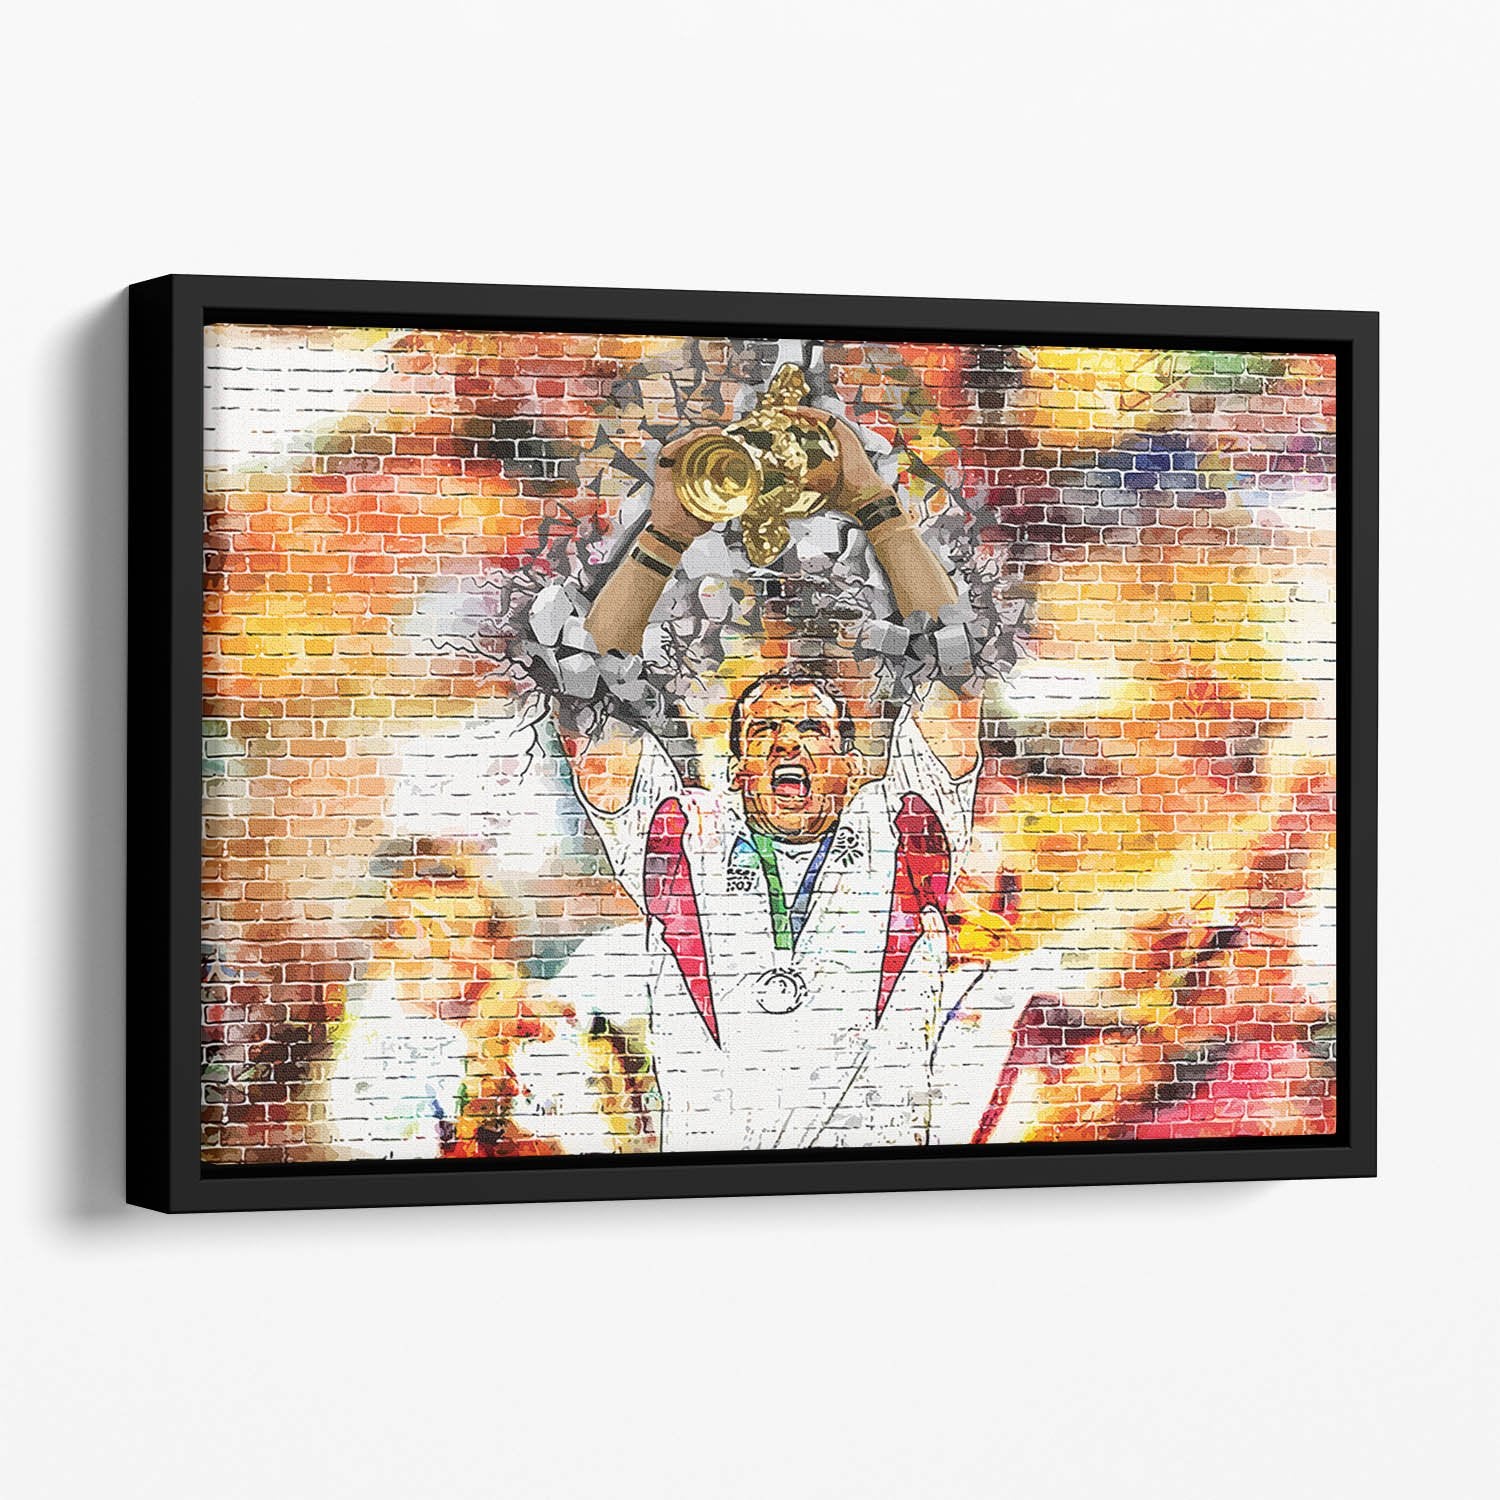 England Rugby World Cup Win 2003 Floating Framed Canvas